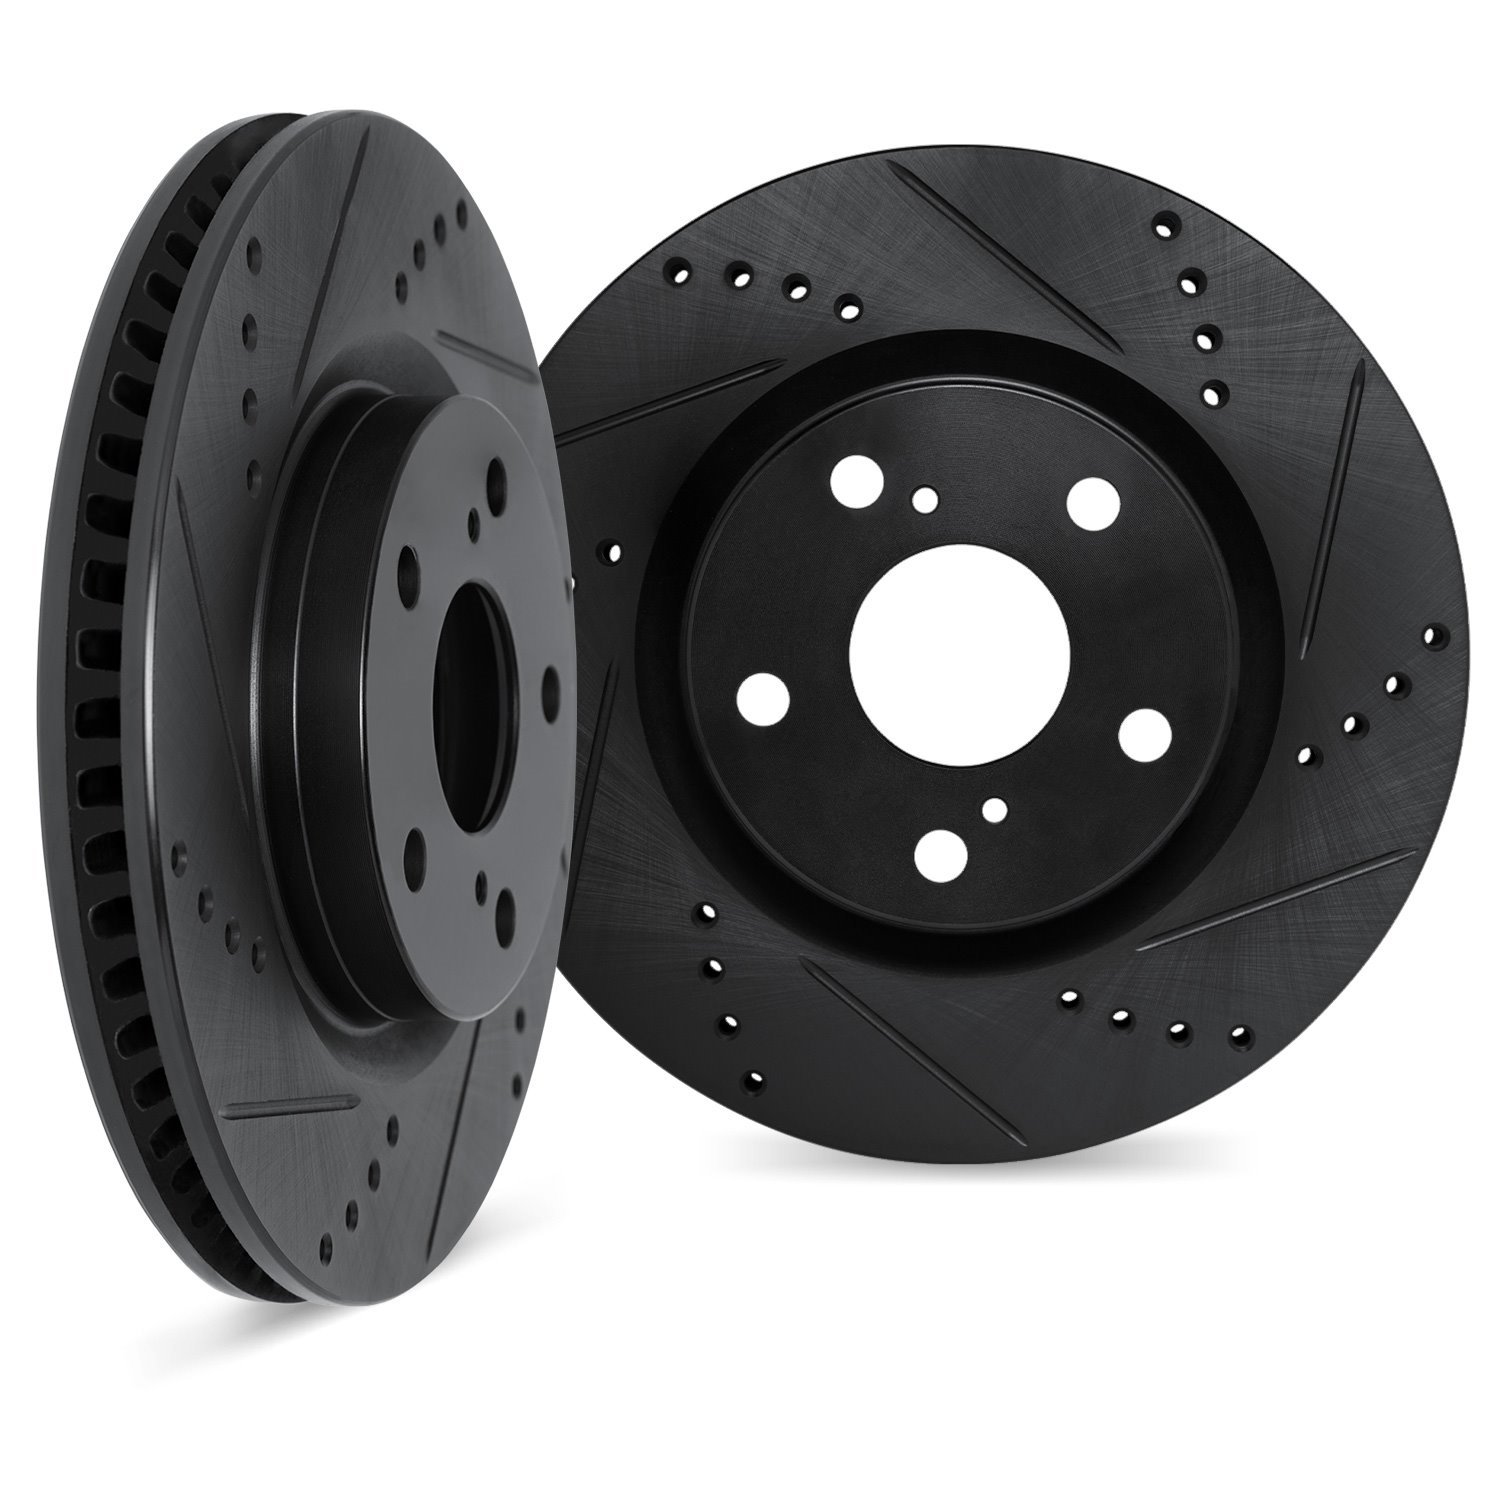 8002-75000 Drilled/Slotted Brake Rotors [Black], Fits Select Lexus/Toyota/Scion, Position: Front